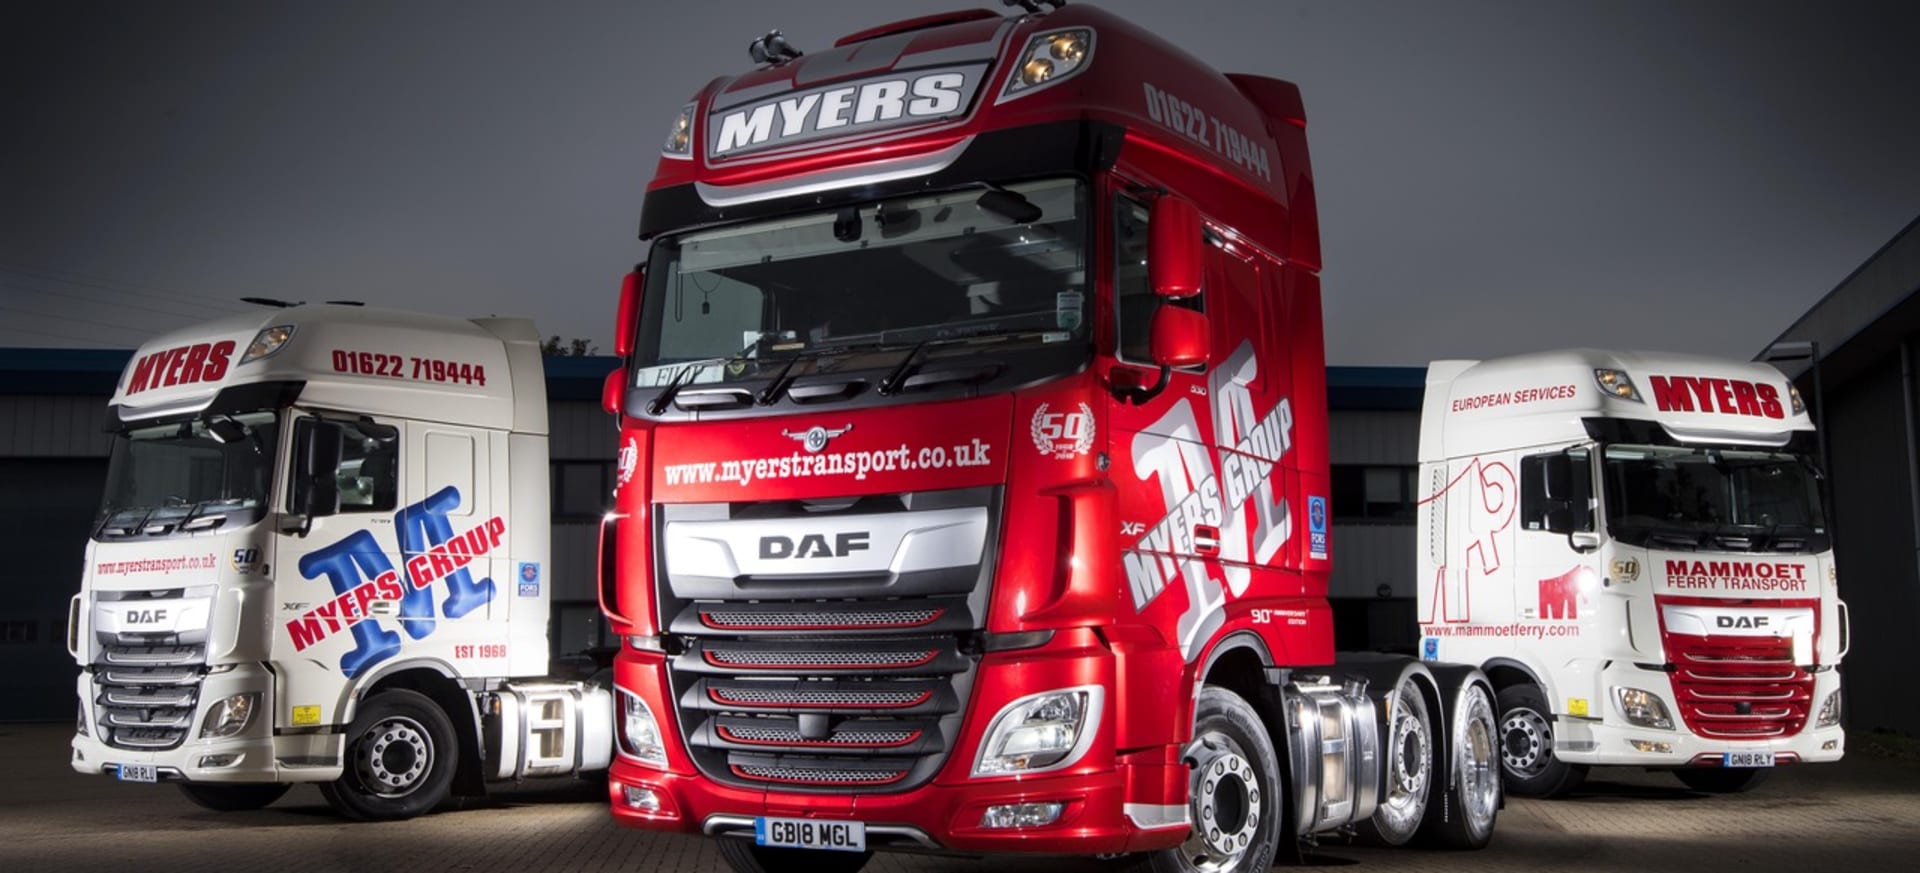 daf truck myers